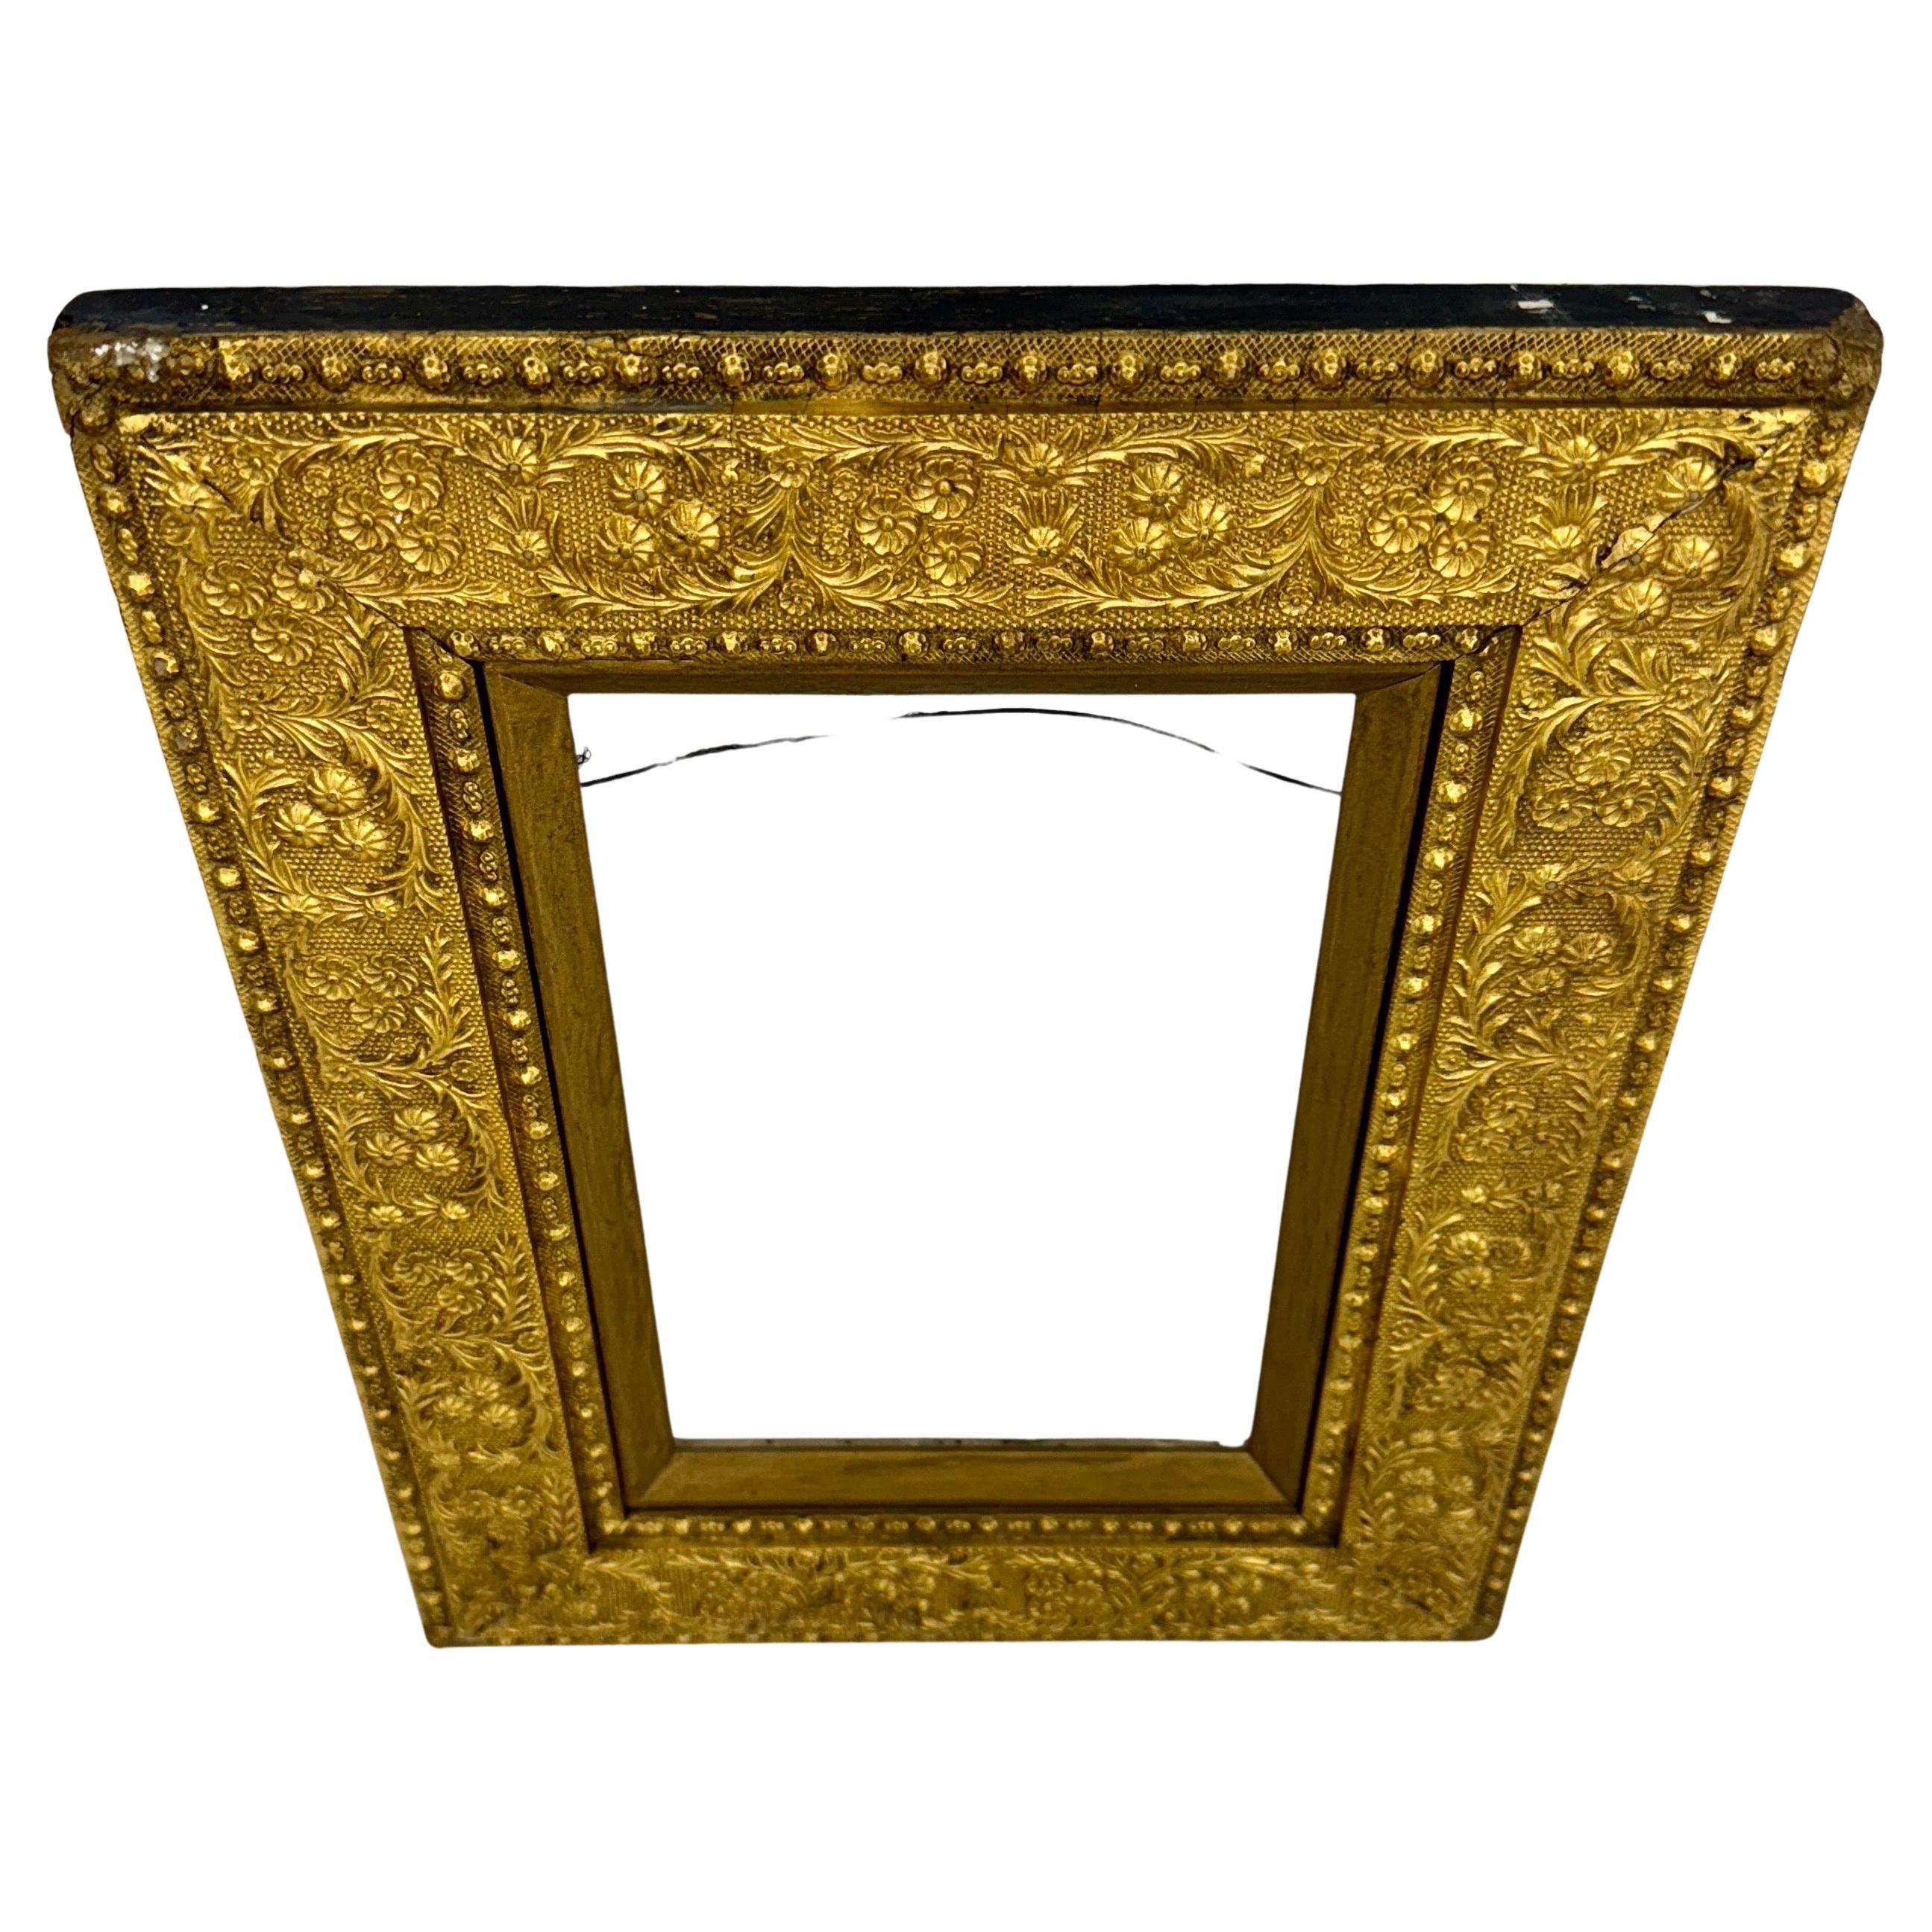 Giltwood Small Italian Antique 19th Century Rectangular Gilded Frame For Sale